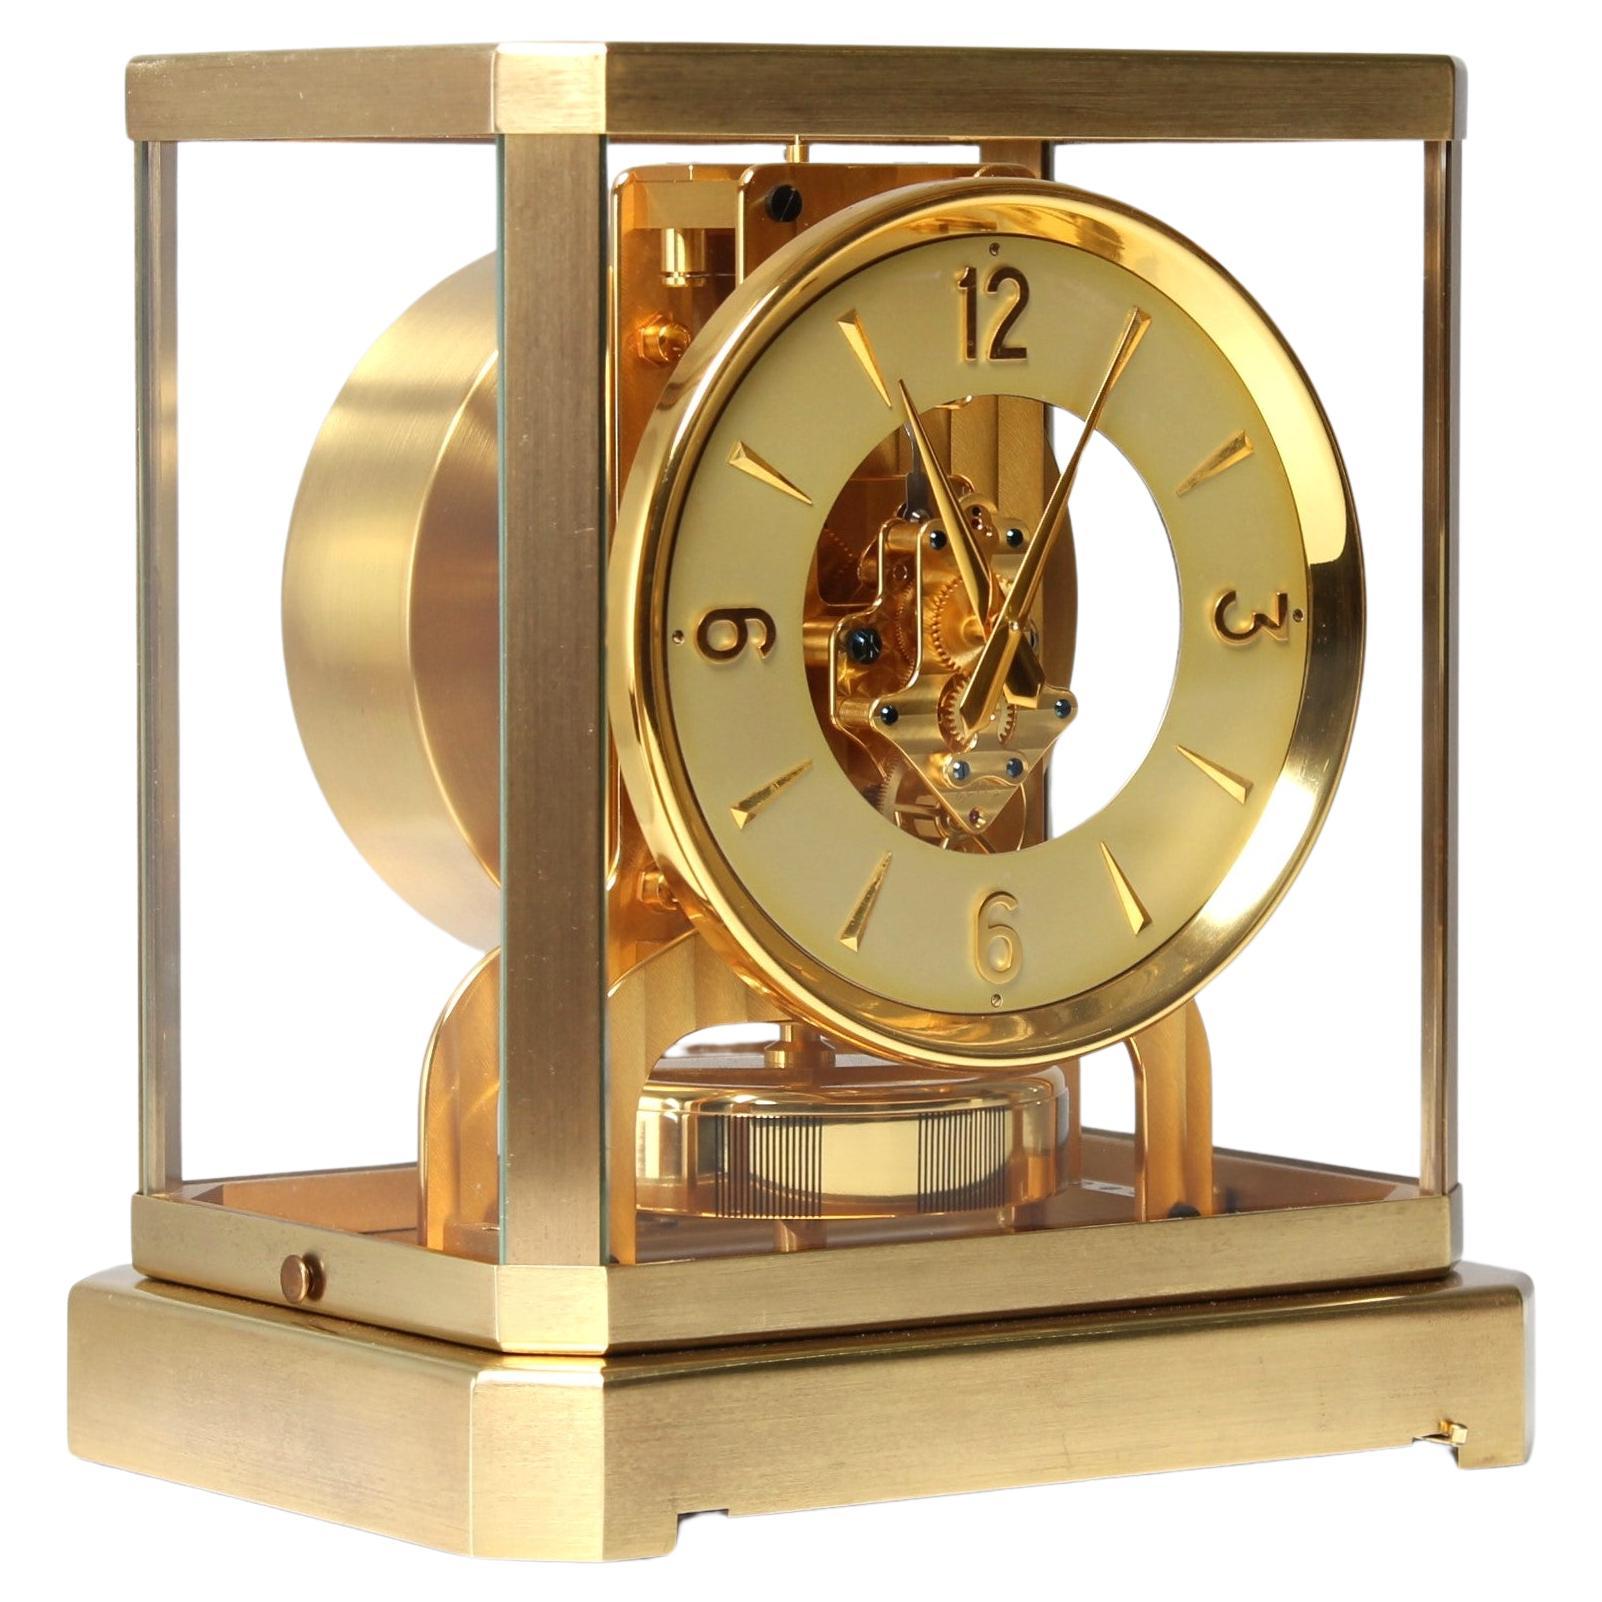 Atmos Clock by Jaeger LeCoultre, Classique Design, Manufactured in 1950